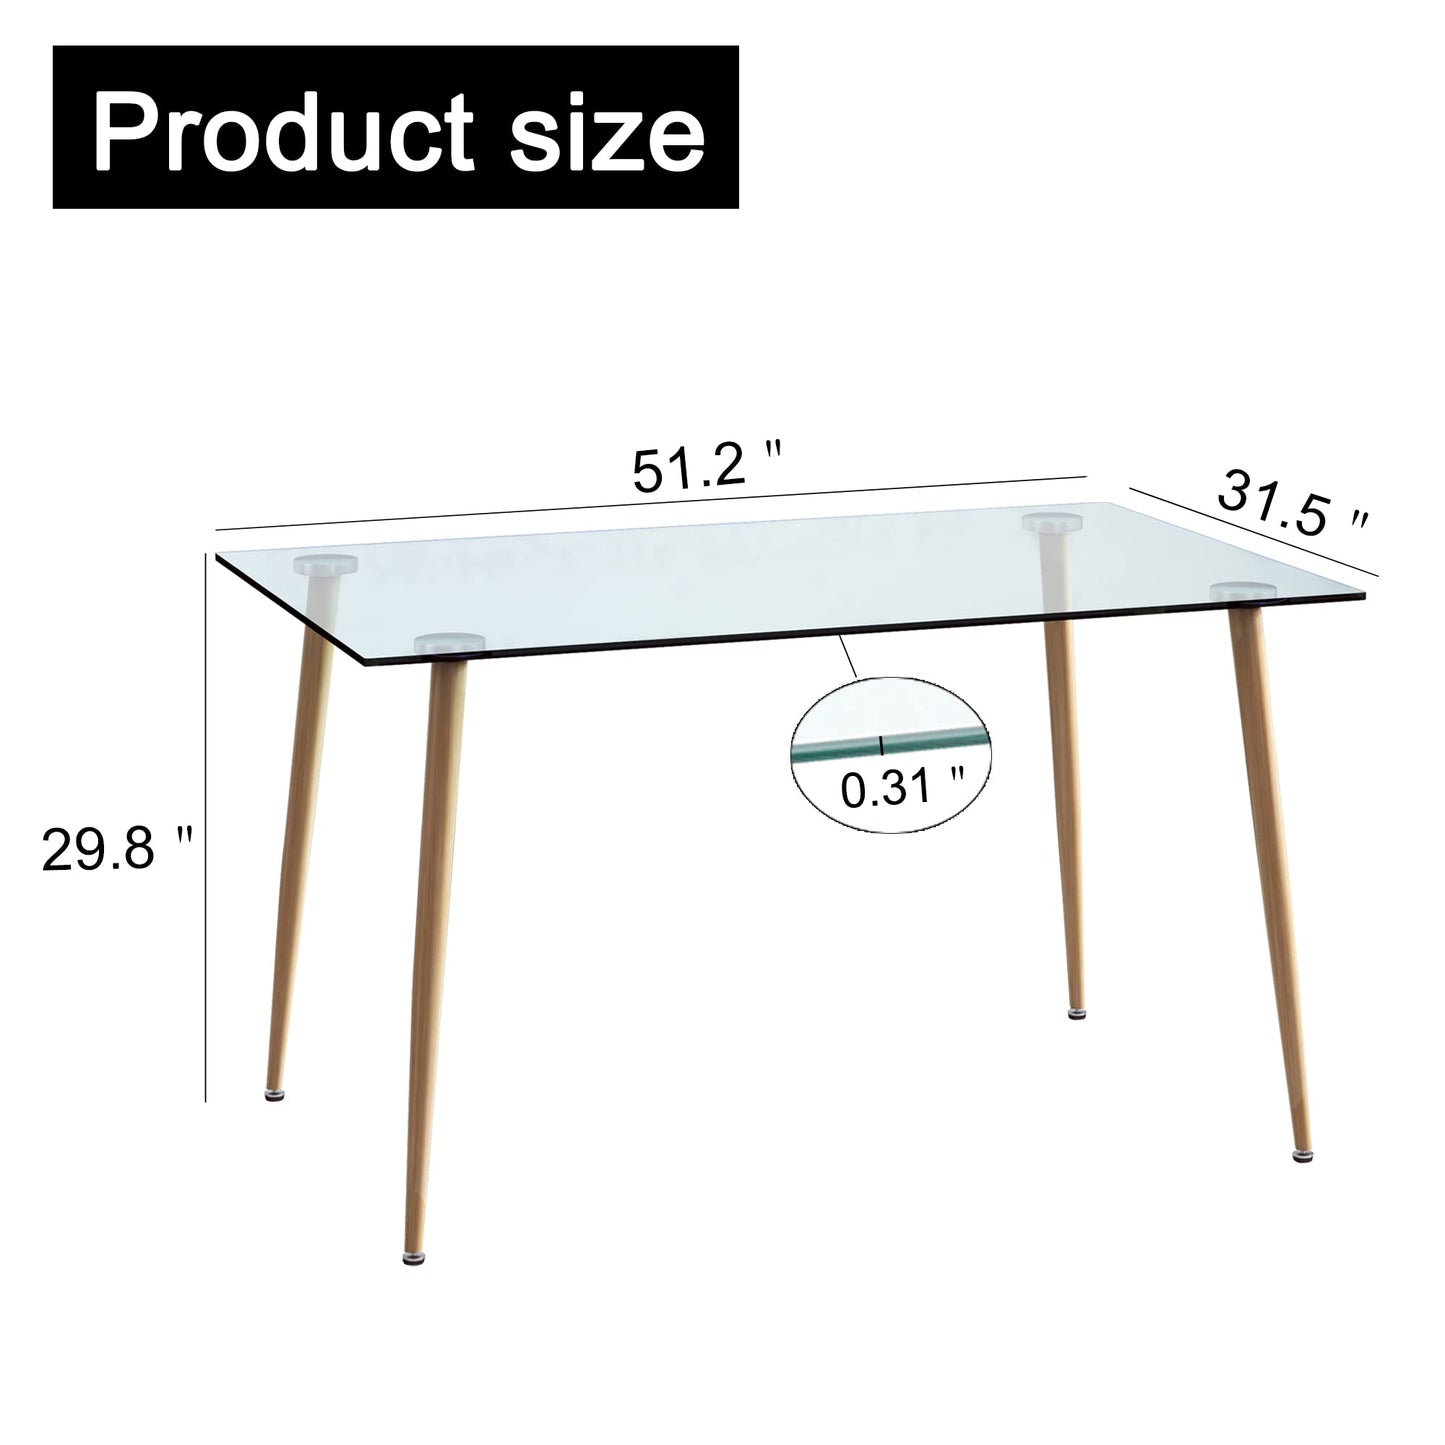 NicBex Modern Rectangular Glass Dining Table for 4-6 with 0.31" Tempered Glass Tabletop and Wood Colored Metal Legs, Writing Table Desk,for Kitchen Dining Living Room, Wood